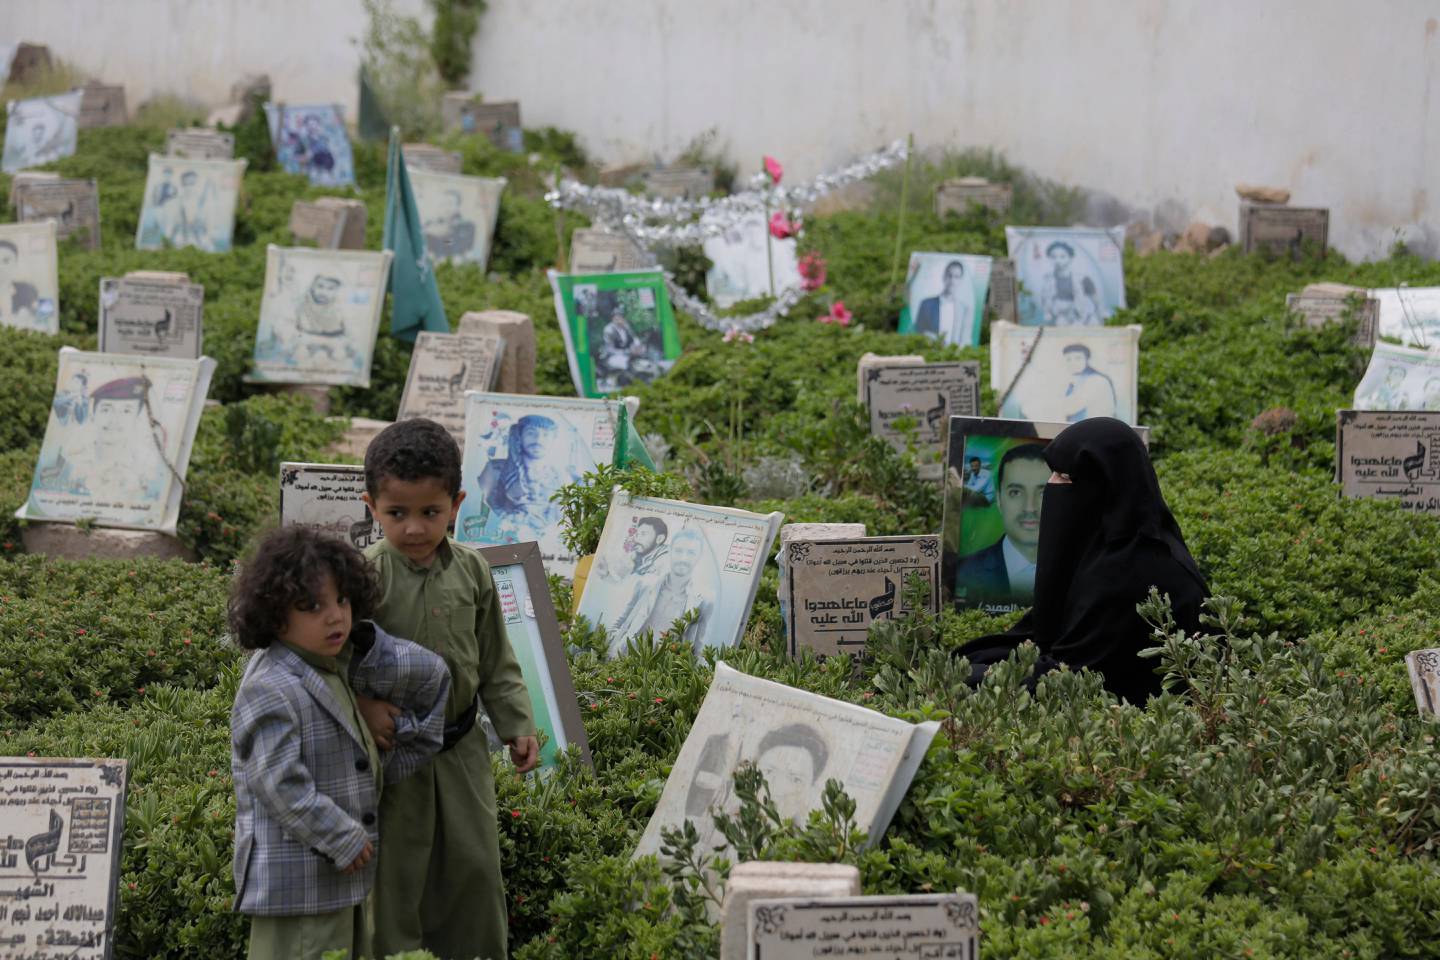 A Yemeni woman,offers prayers at the grave of her husband who was killed during Yemen's ongoing conflict, at a cemetery in Sanaa, Yemen, Friday, July 3, 2020. (AP Photo/Hani Mohammed)